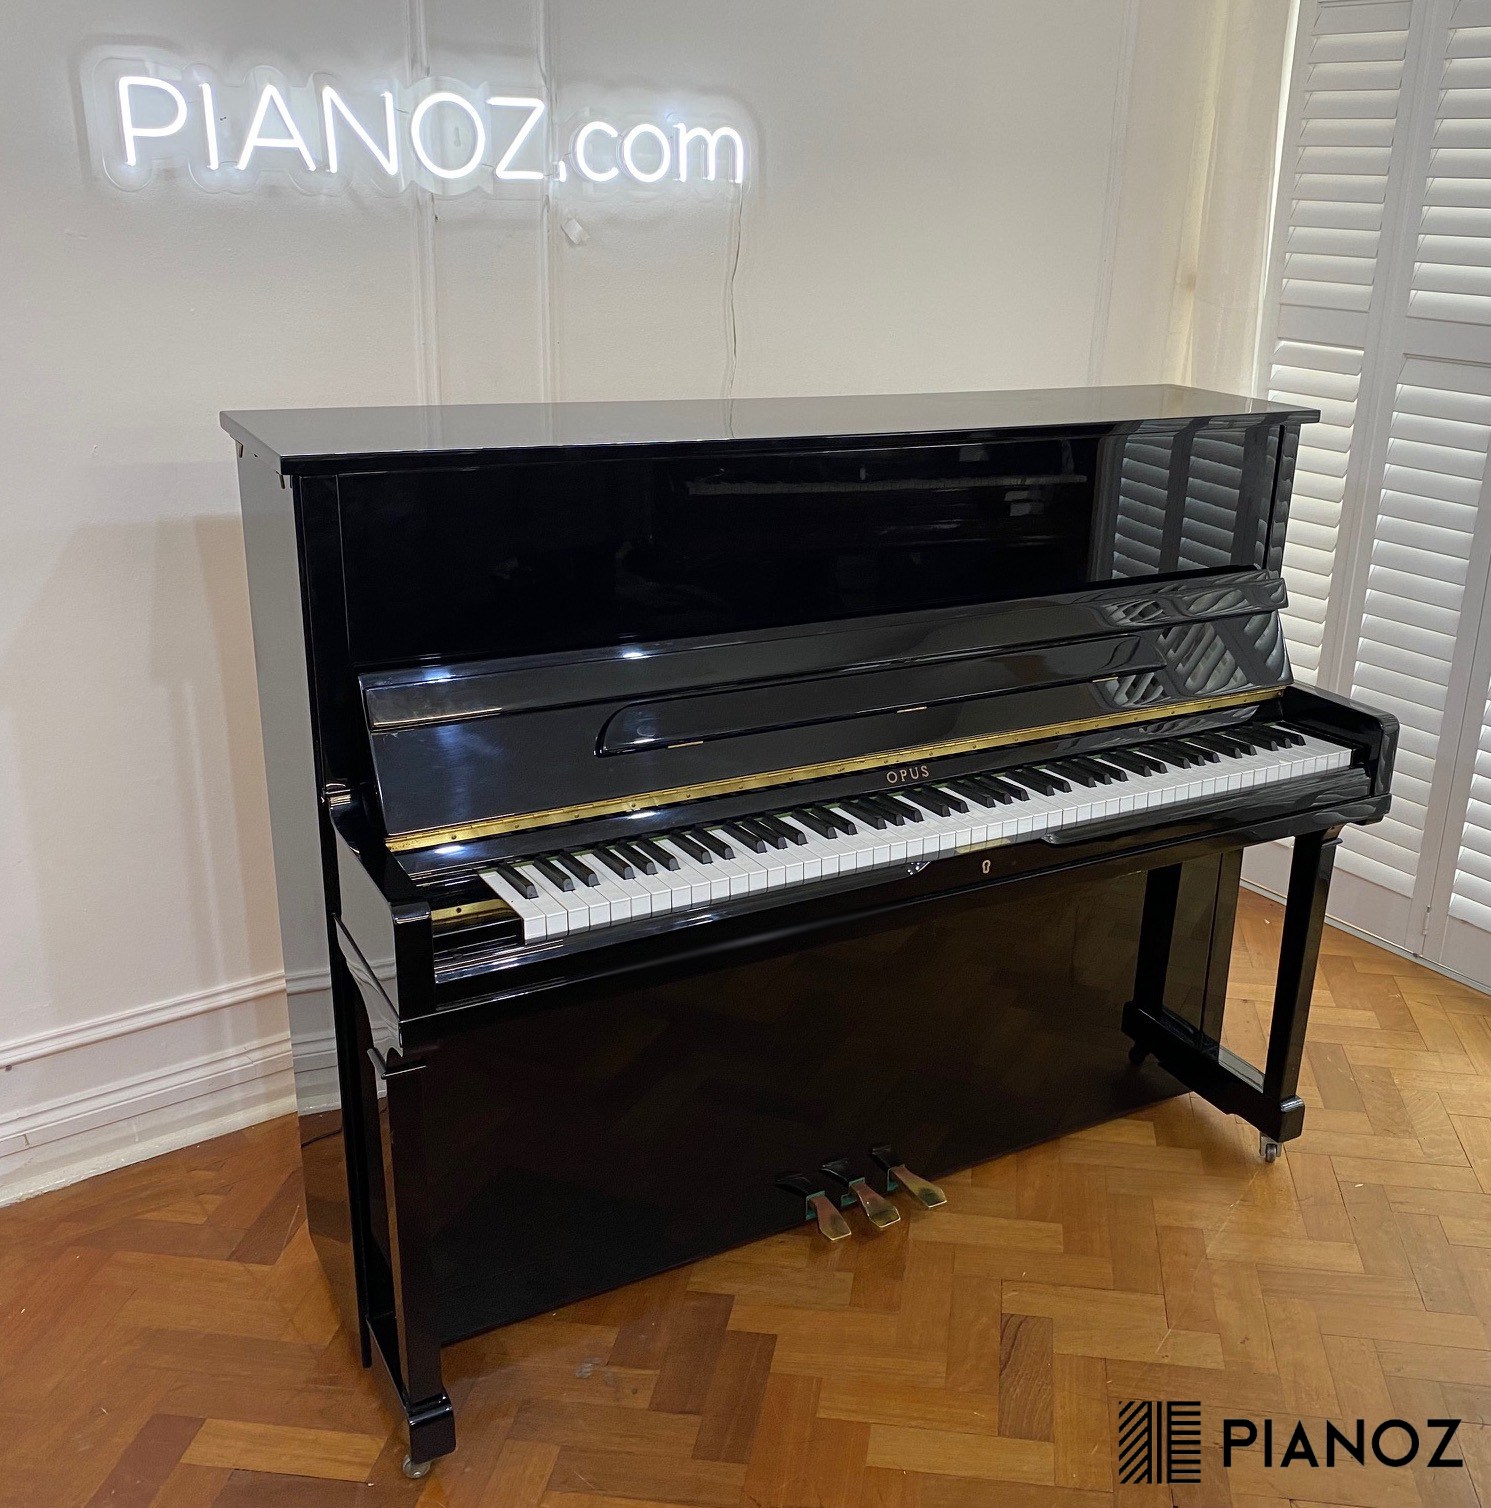 Opus 120 Upright Piano piano for sale in UK